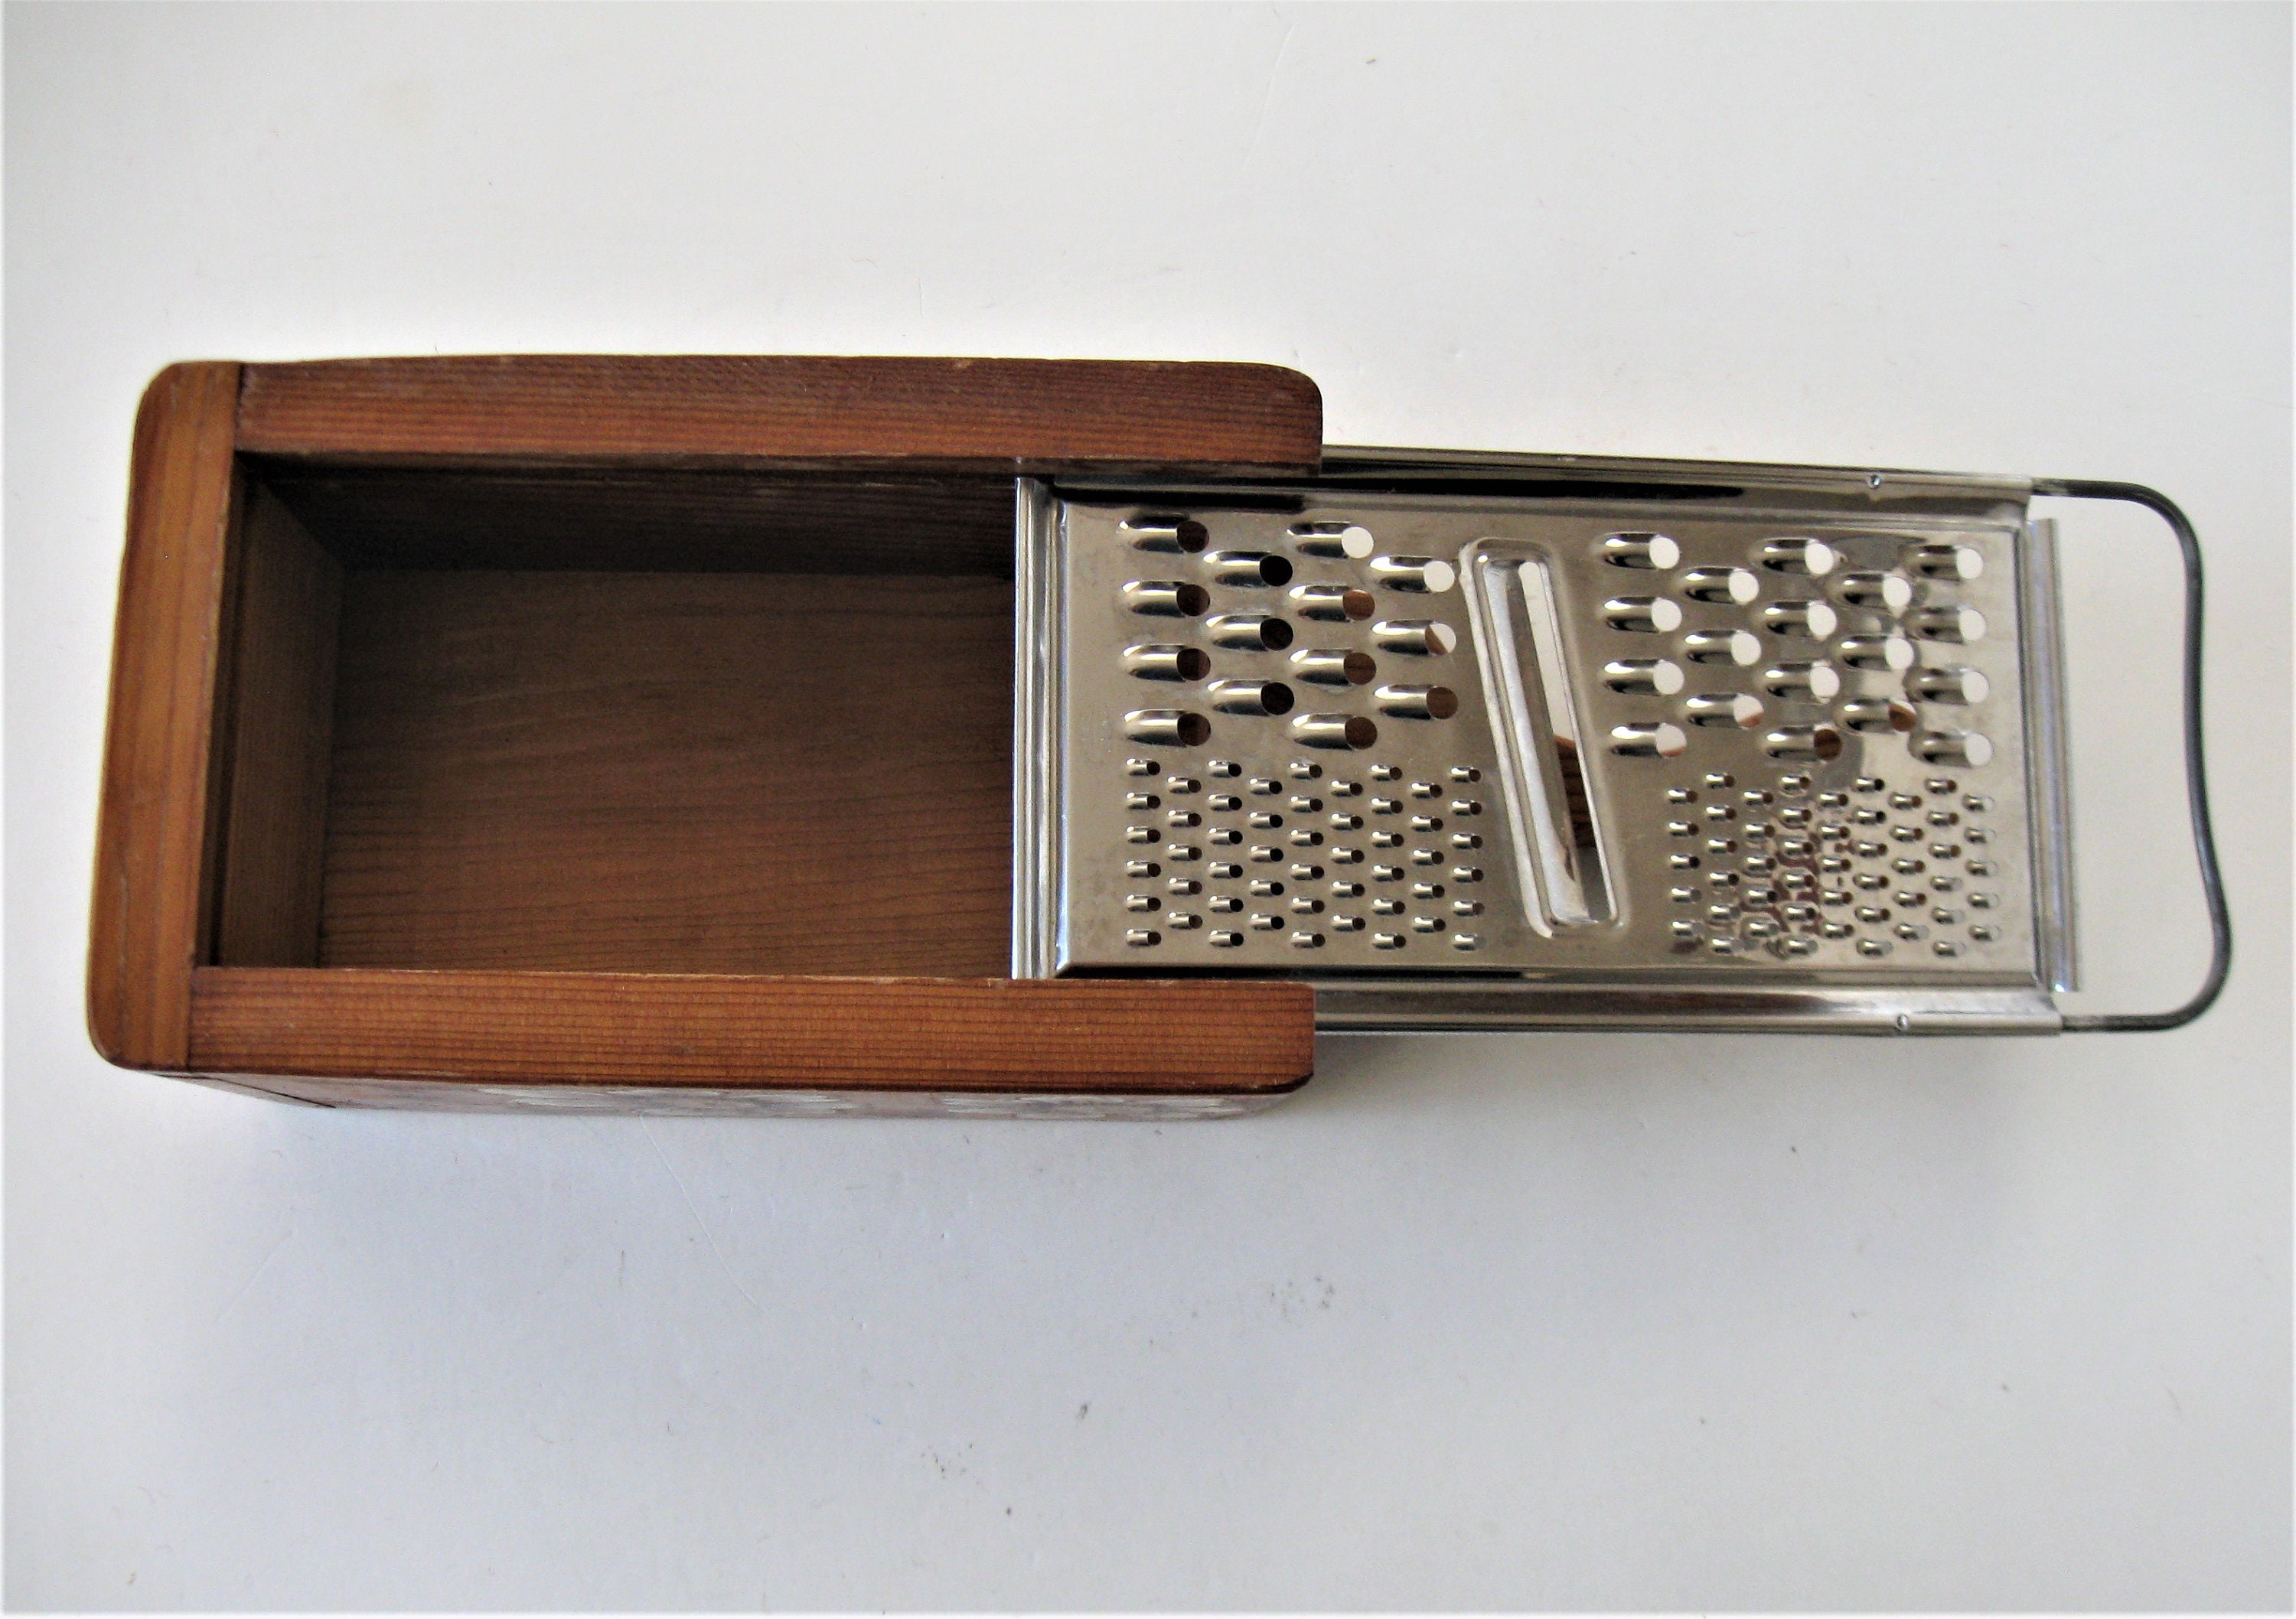 Vintage Wood Box Cheese Grater, 13 X 5 X 3 1/2, Hand Painted